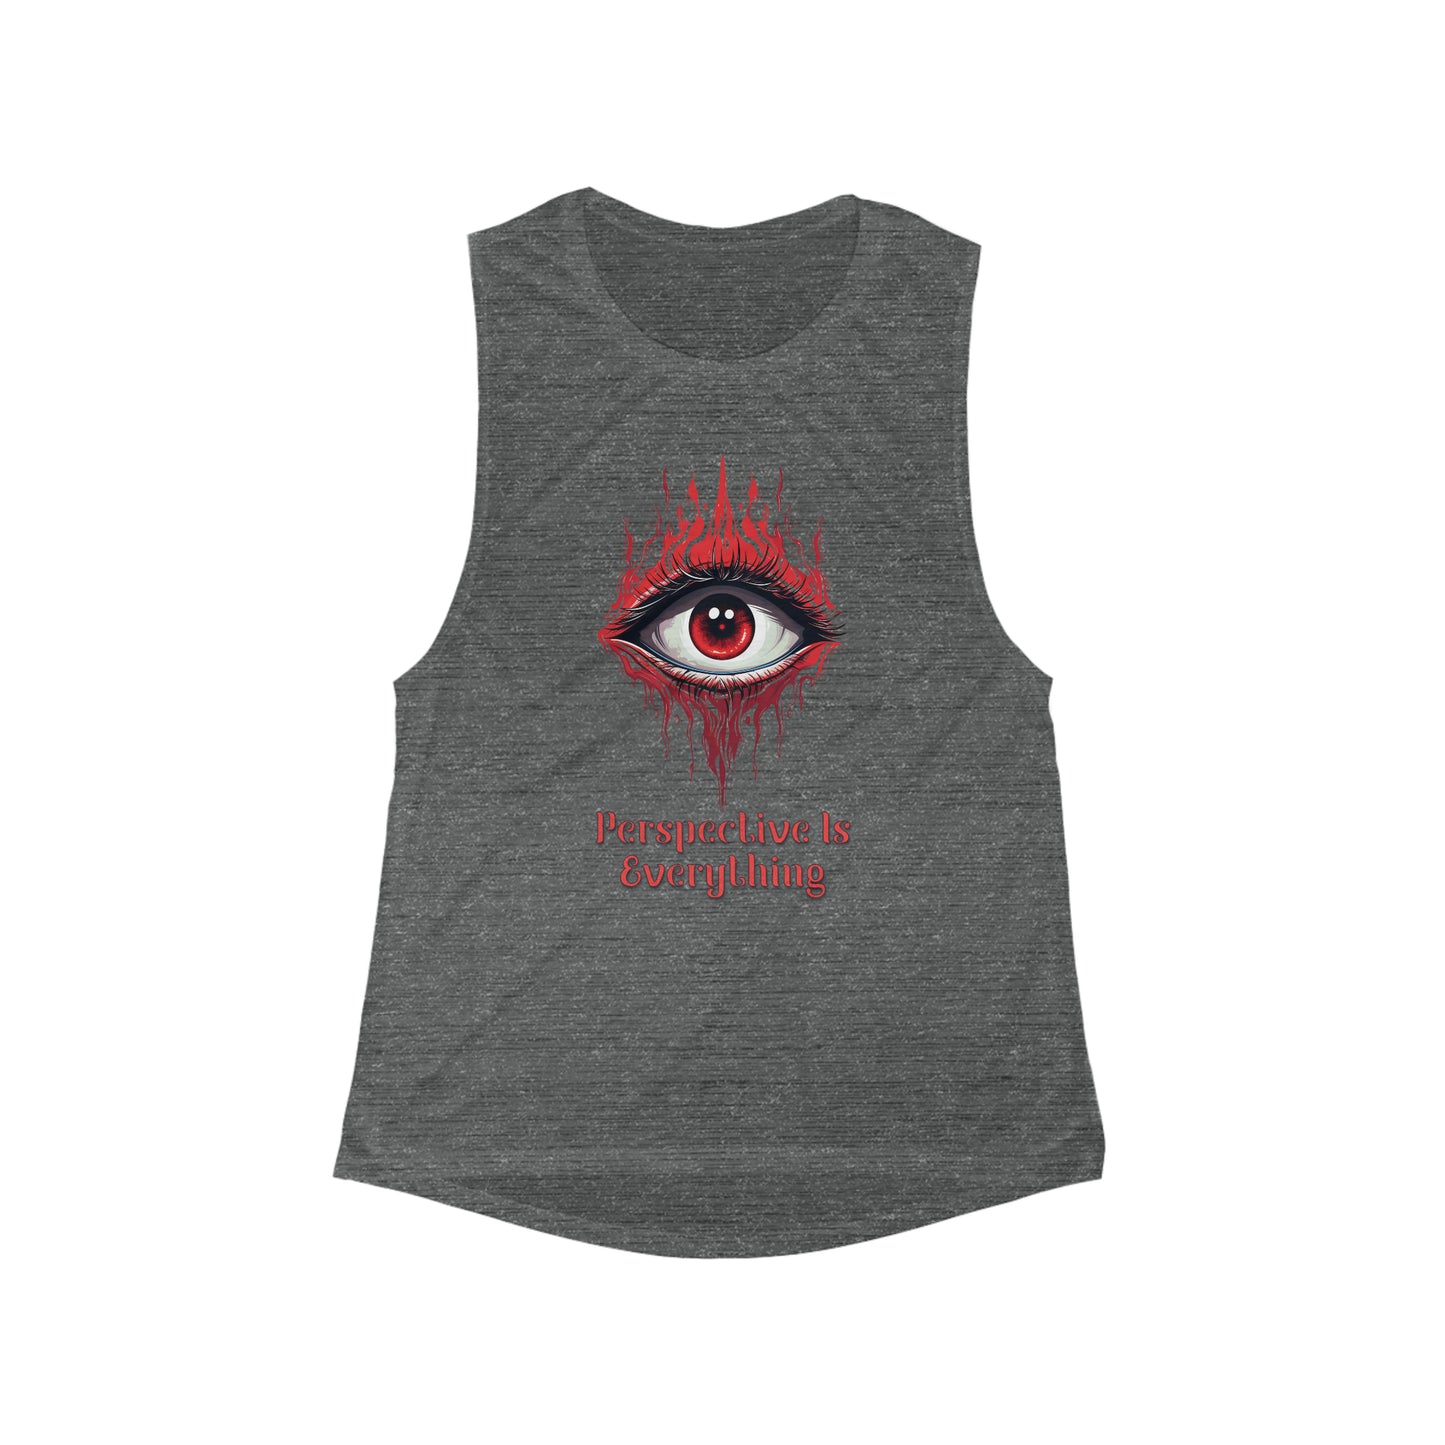 Perspective is Everything: Red | Women's Flowy Scoop Muscle Tank